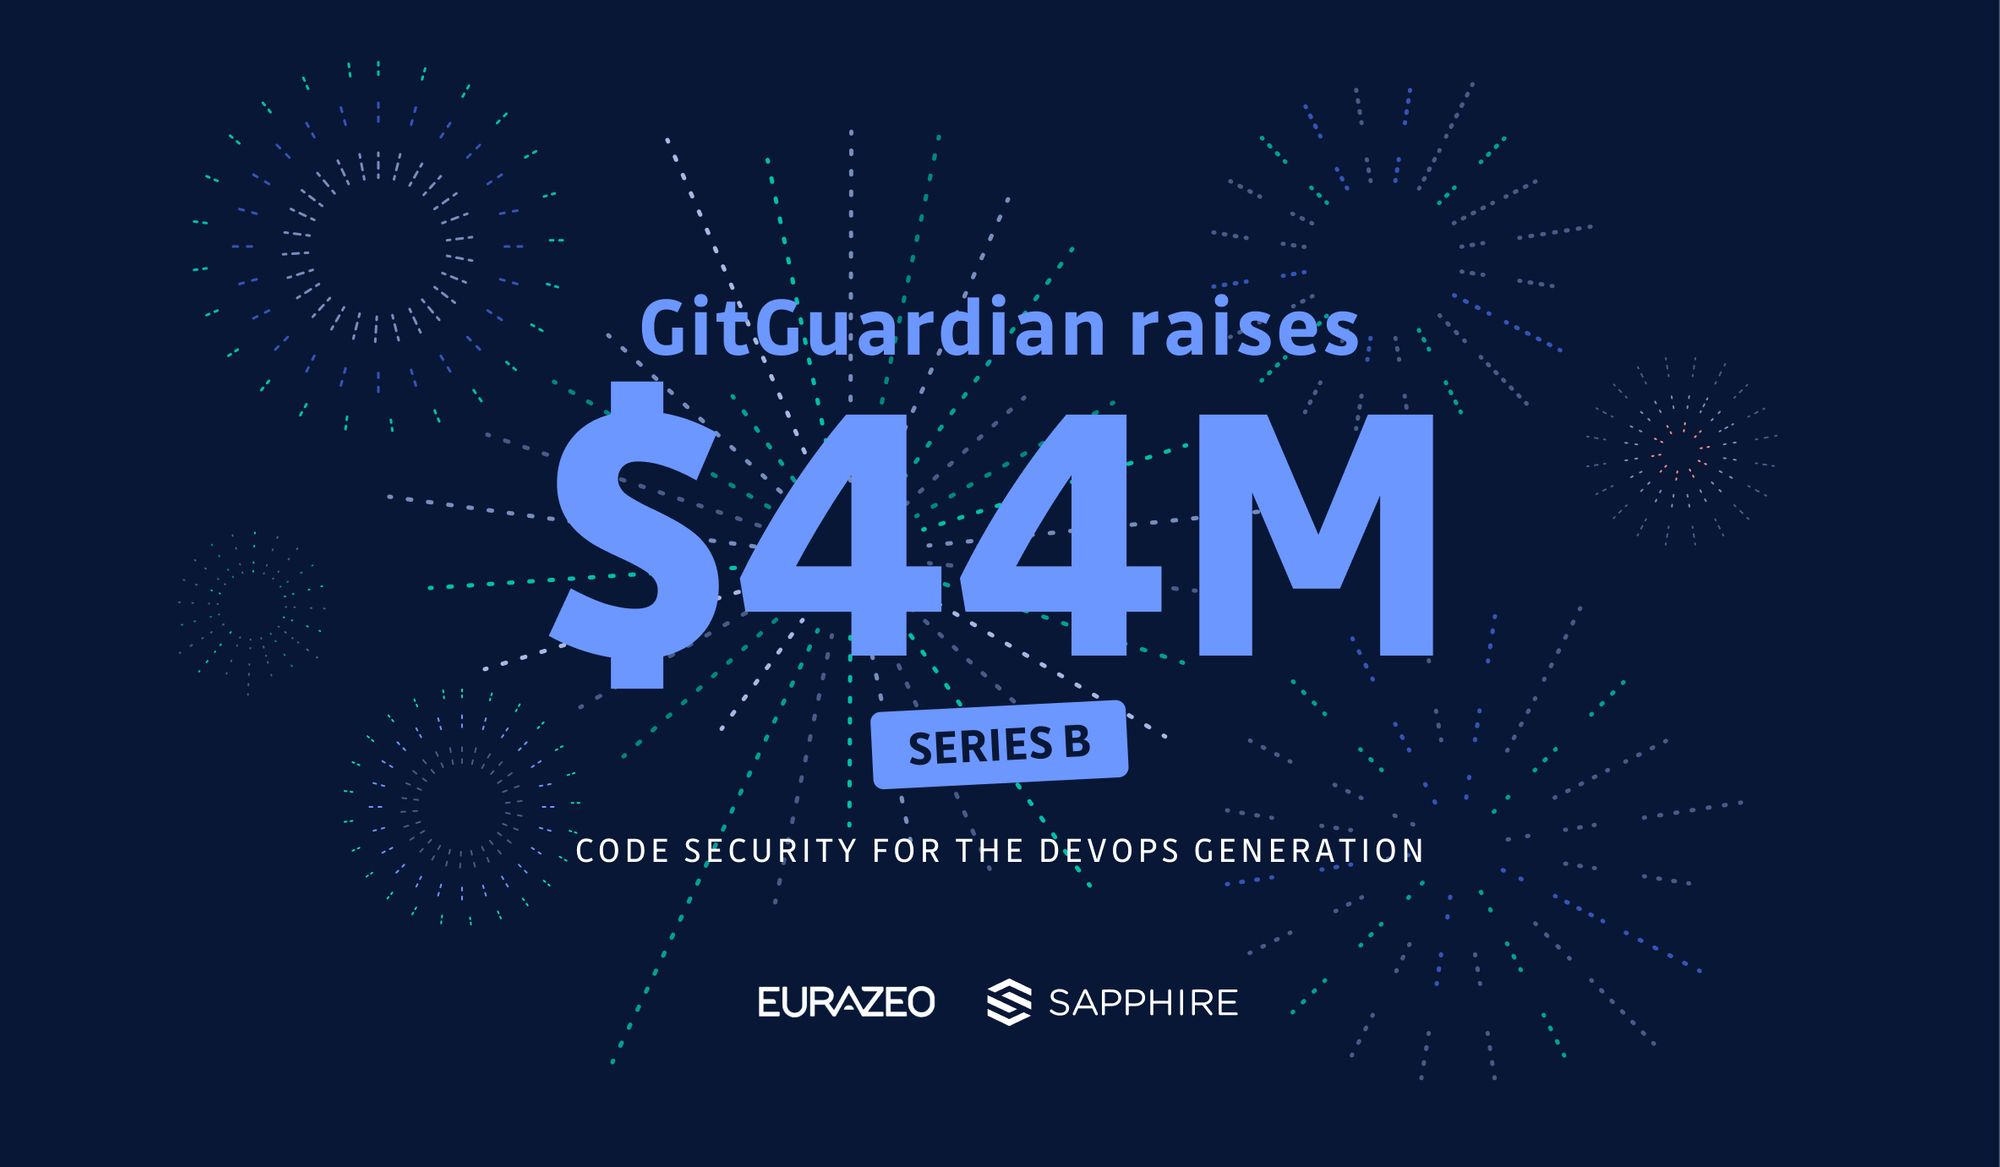 Announcing our $44M fundraise to further enable the AppSec Shared Responsibility Model